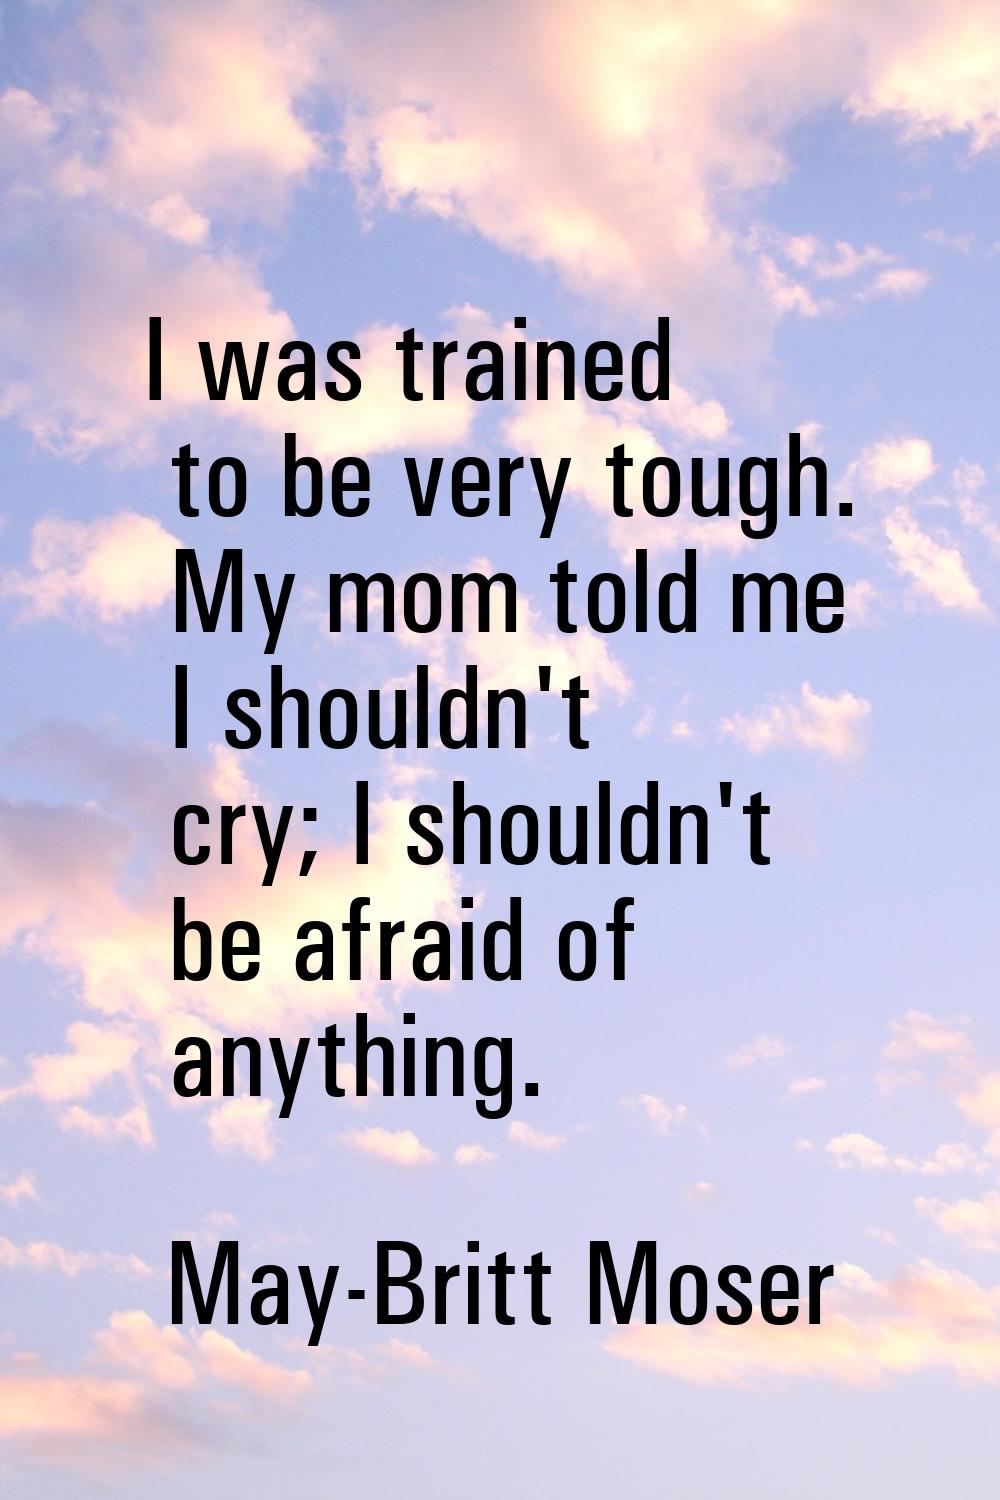 I was trained to be very tough. My mom told me I shouldn't cry; I shouldn't be afraid of anything.